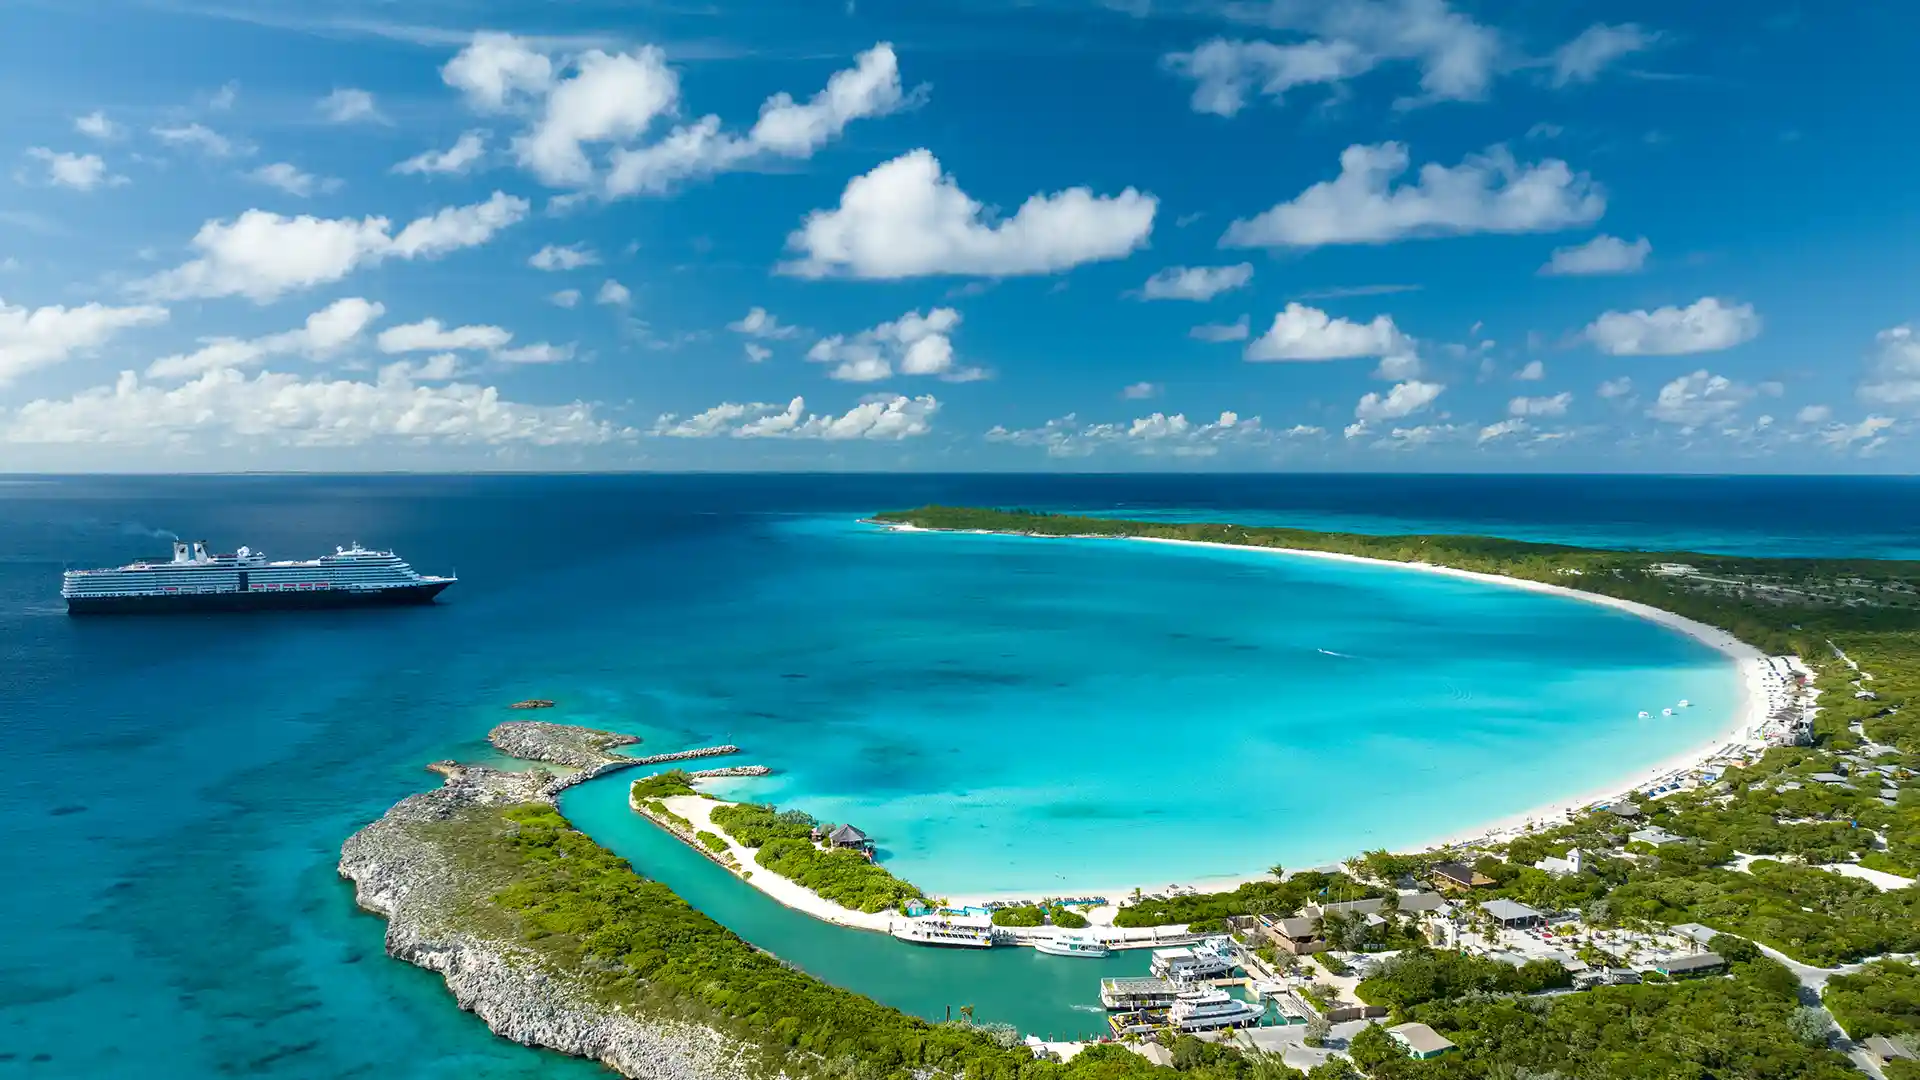 View of Holland America Line's private island, Half Moon Cay, in Bahamas with cruise ship in background.